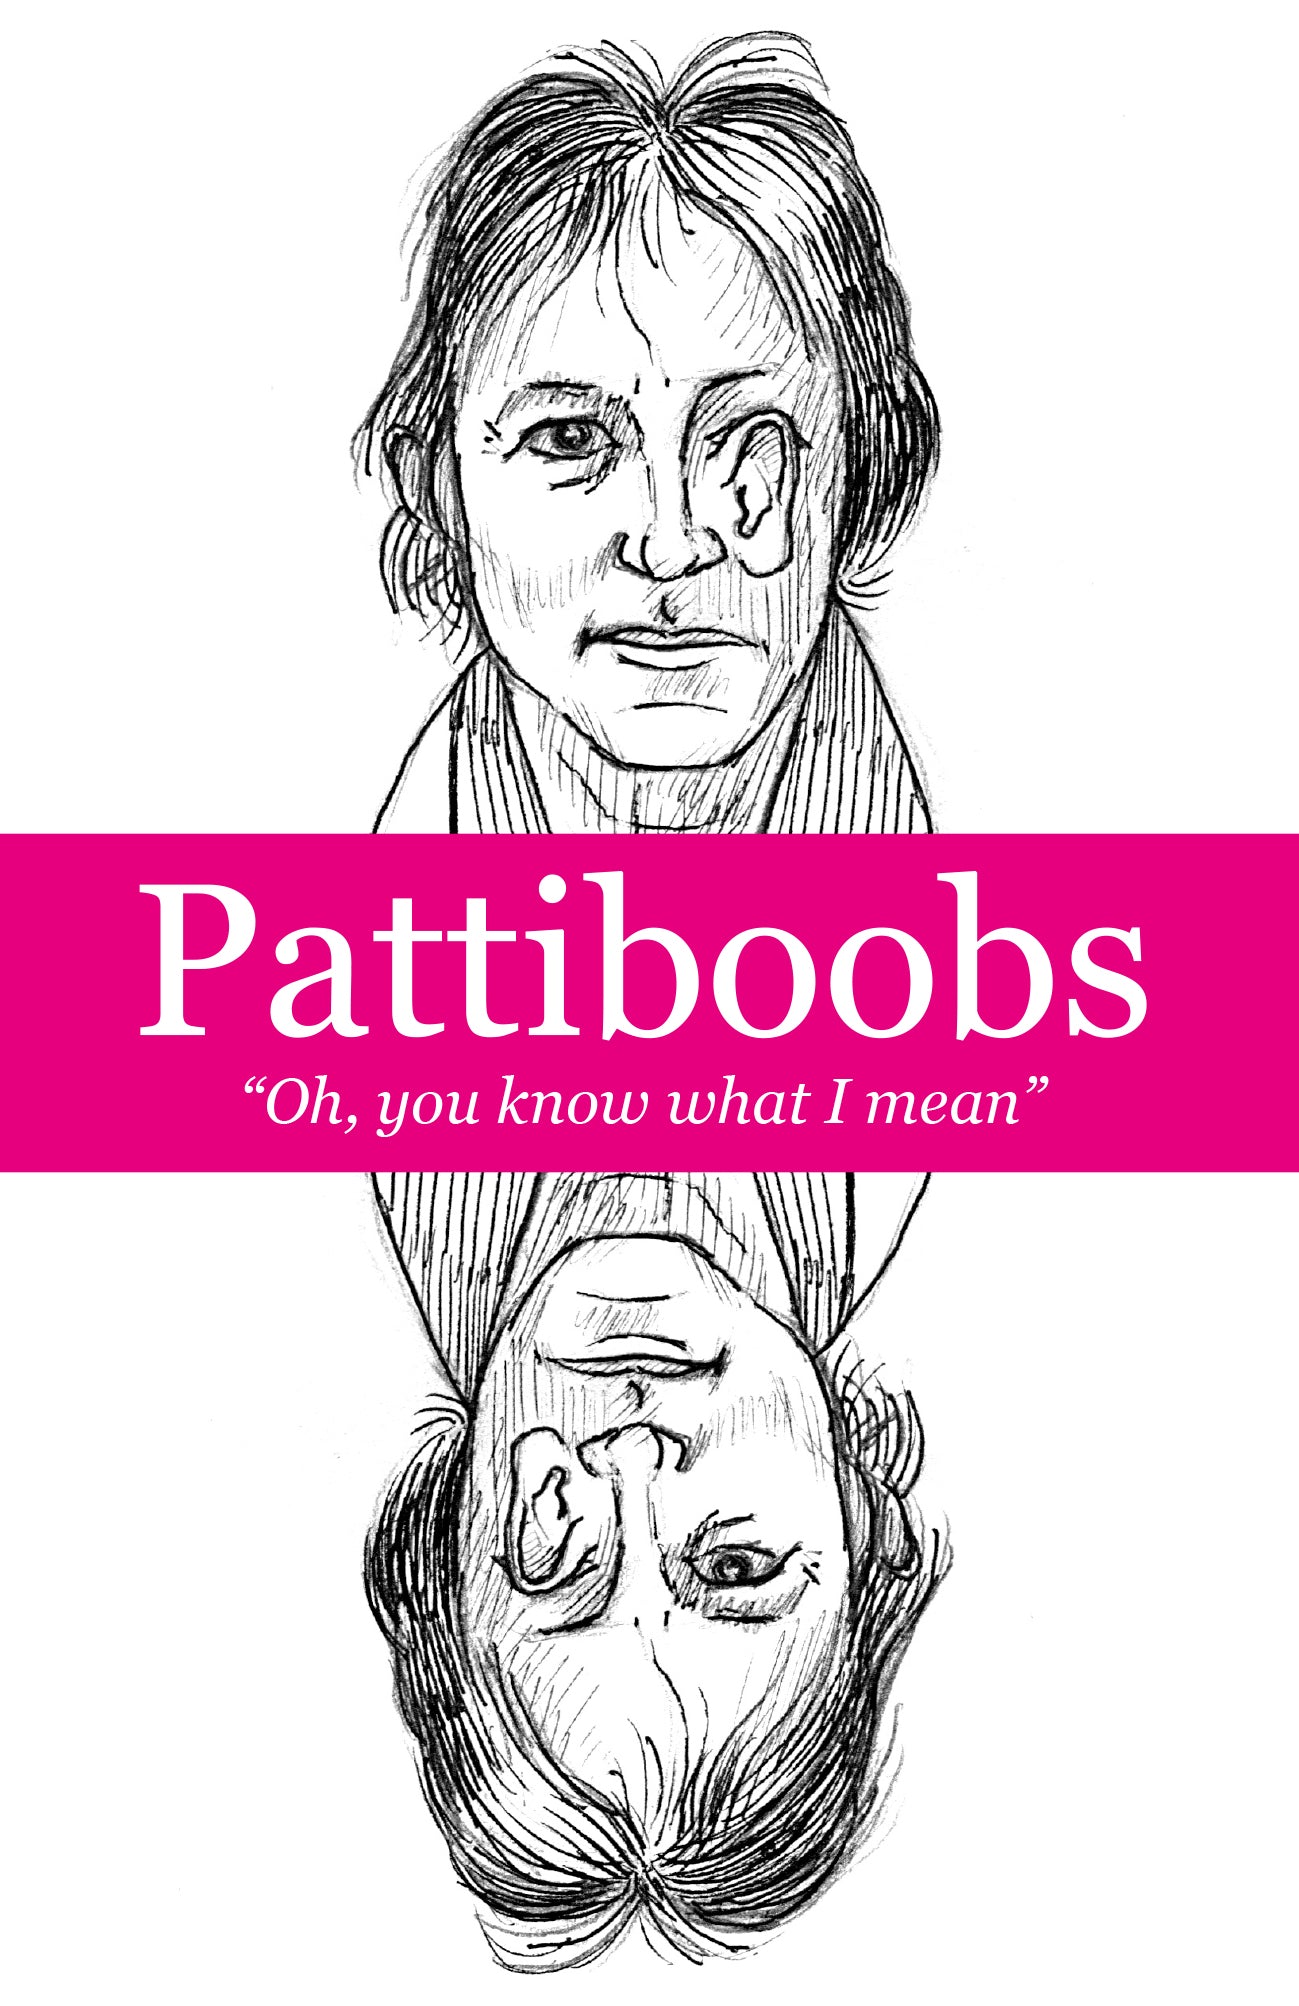 Pattiboobs: Oh, you know what I mean